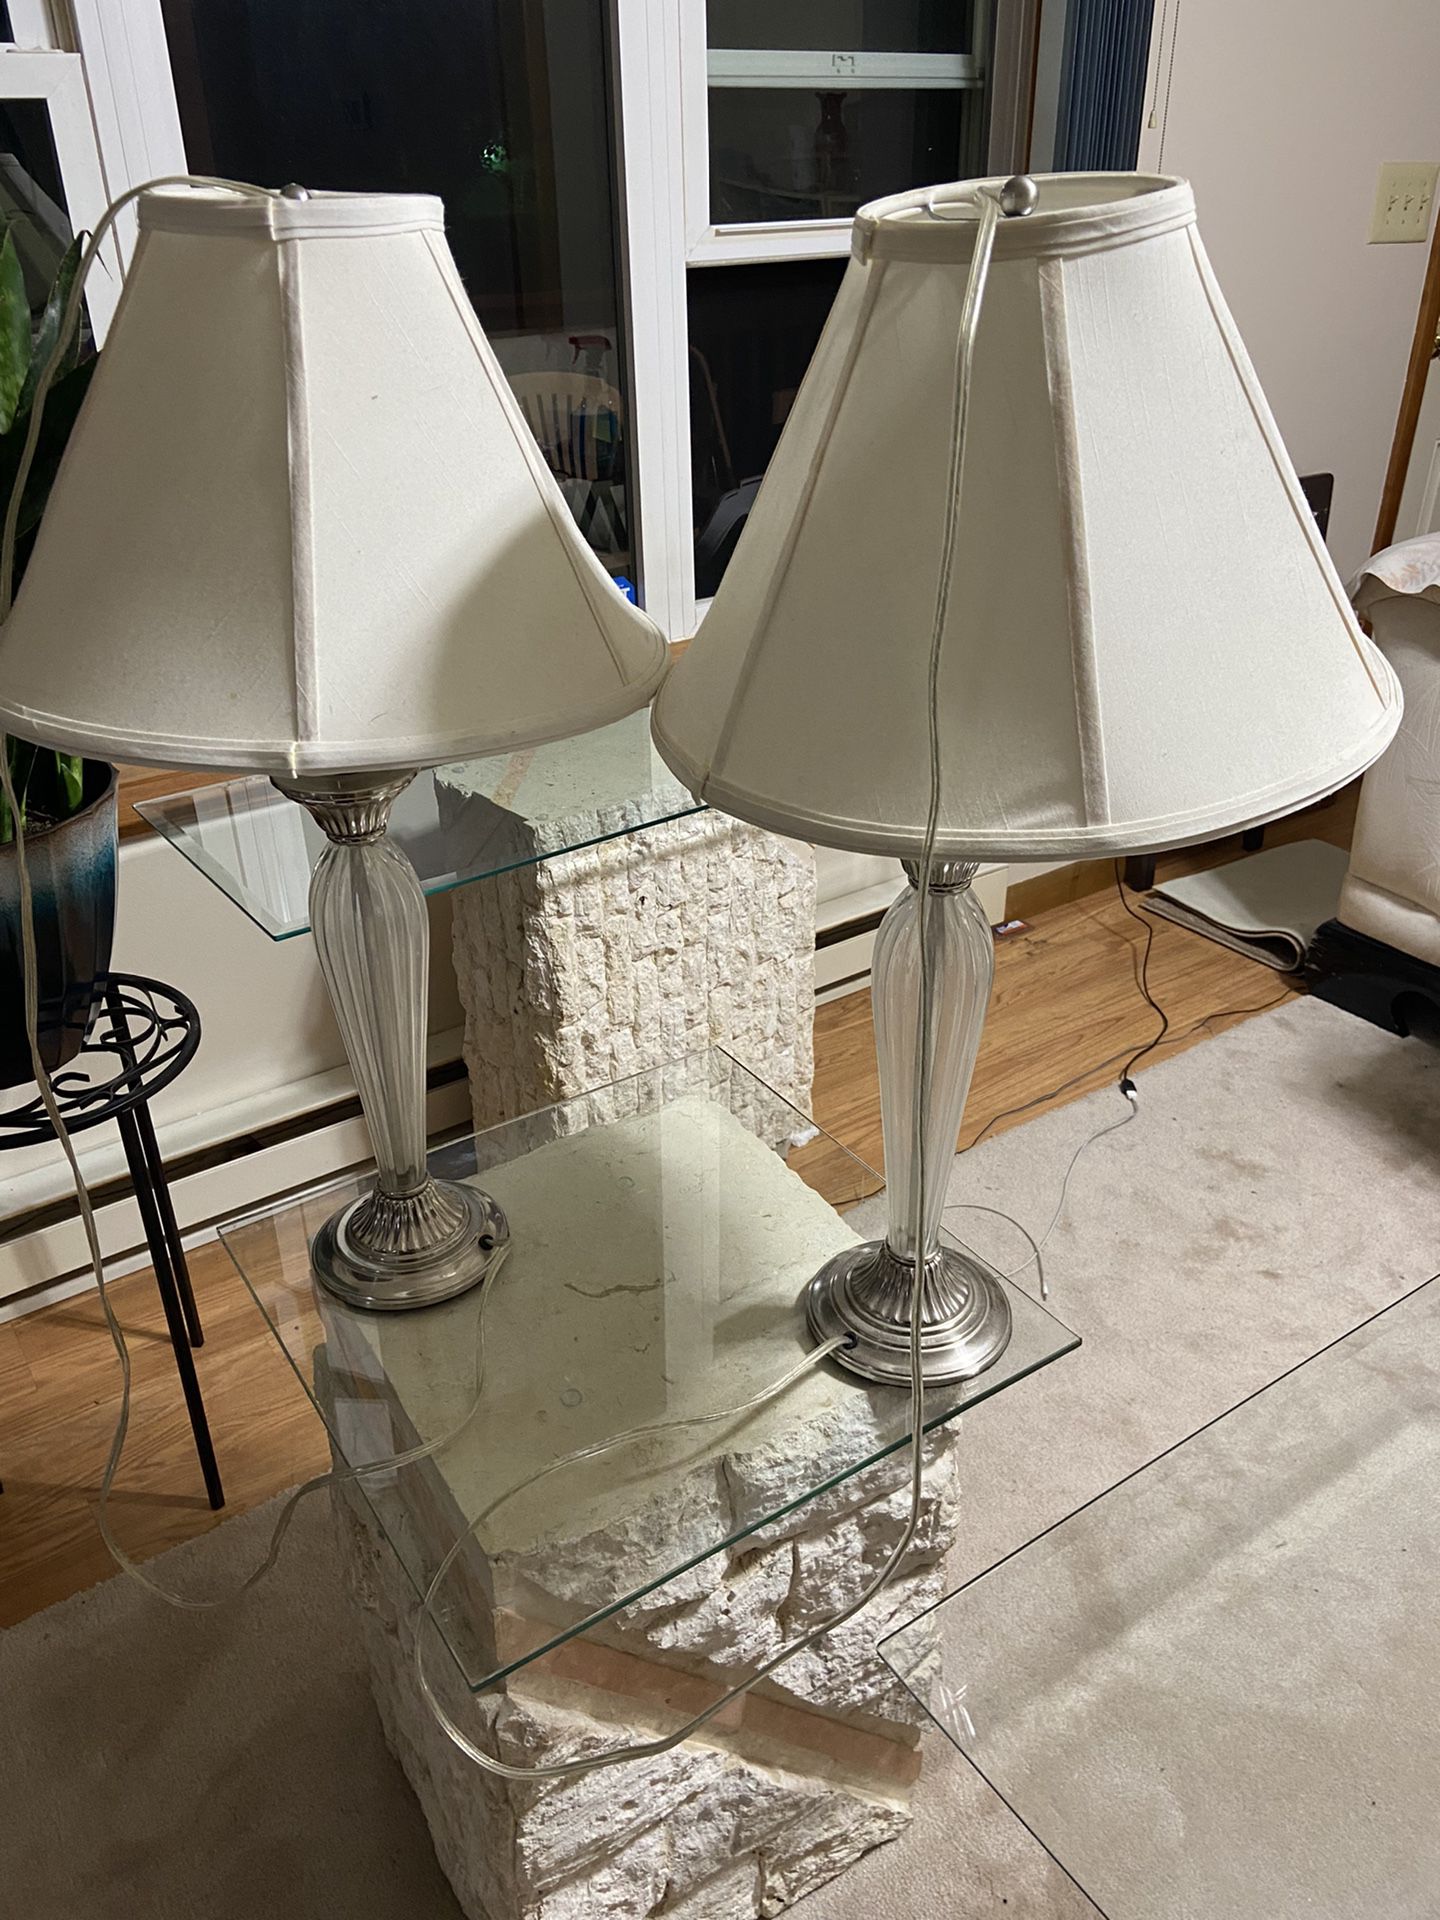 Two Glass Lamps